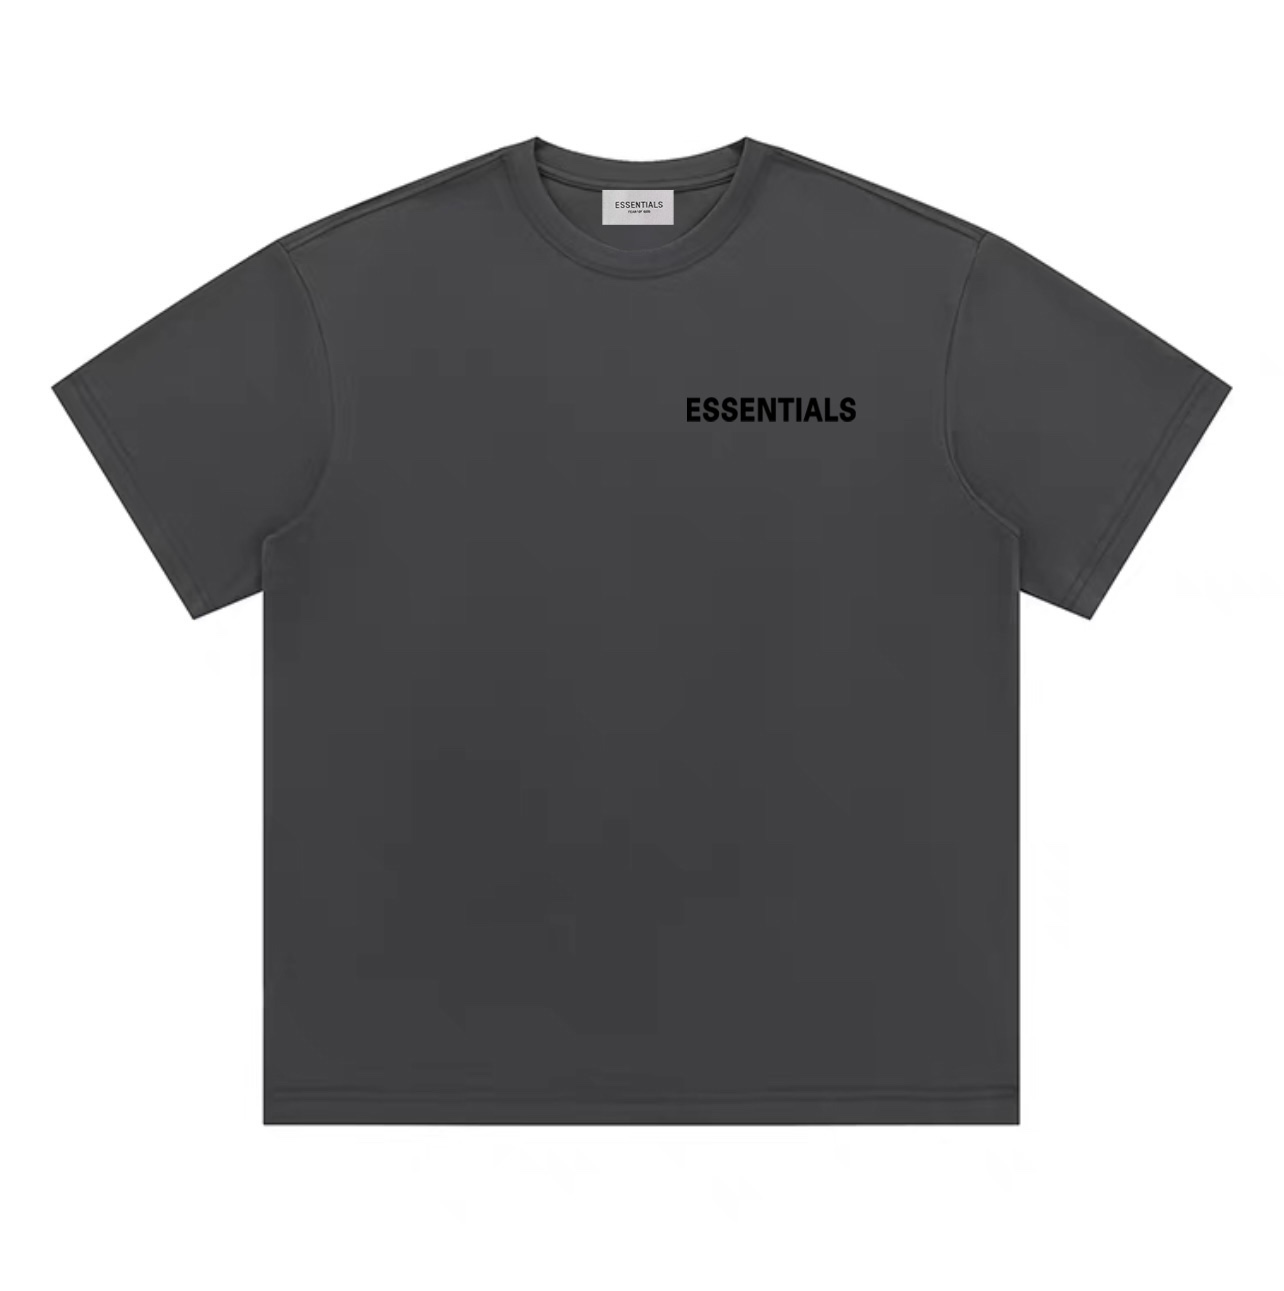 Sellers Online
 ESSENTIALS Clothing T-Shirt Black Grey White Printing Unisex Cotton Essential Short Sleeve